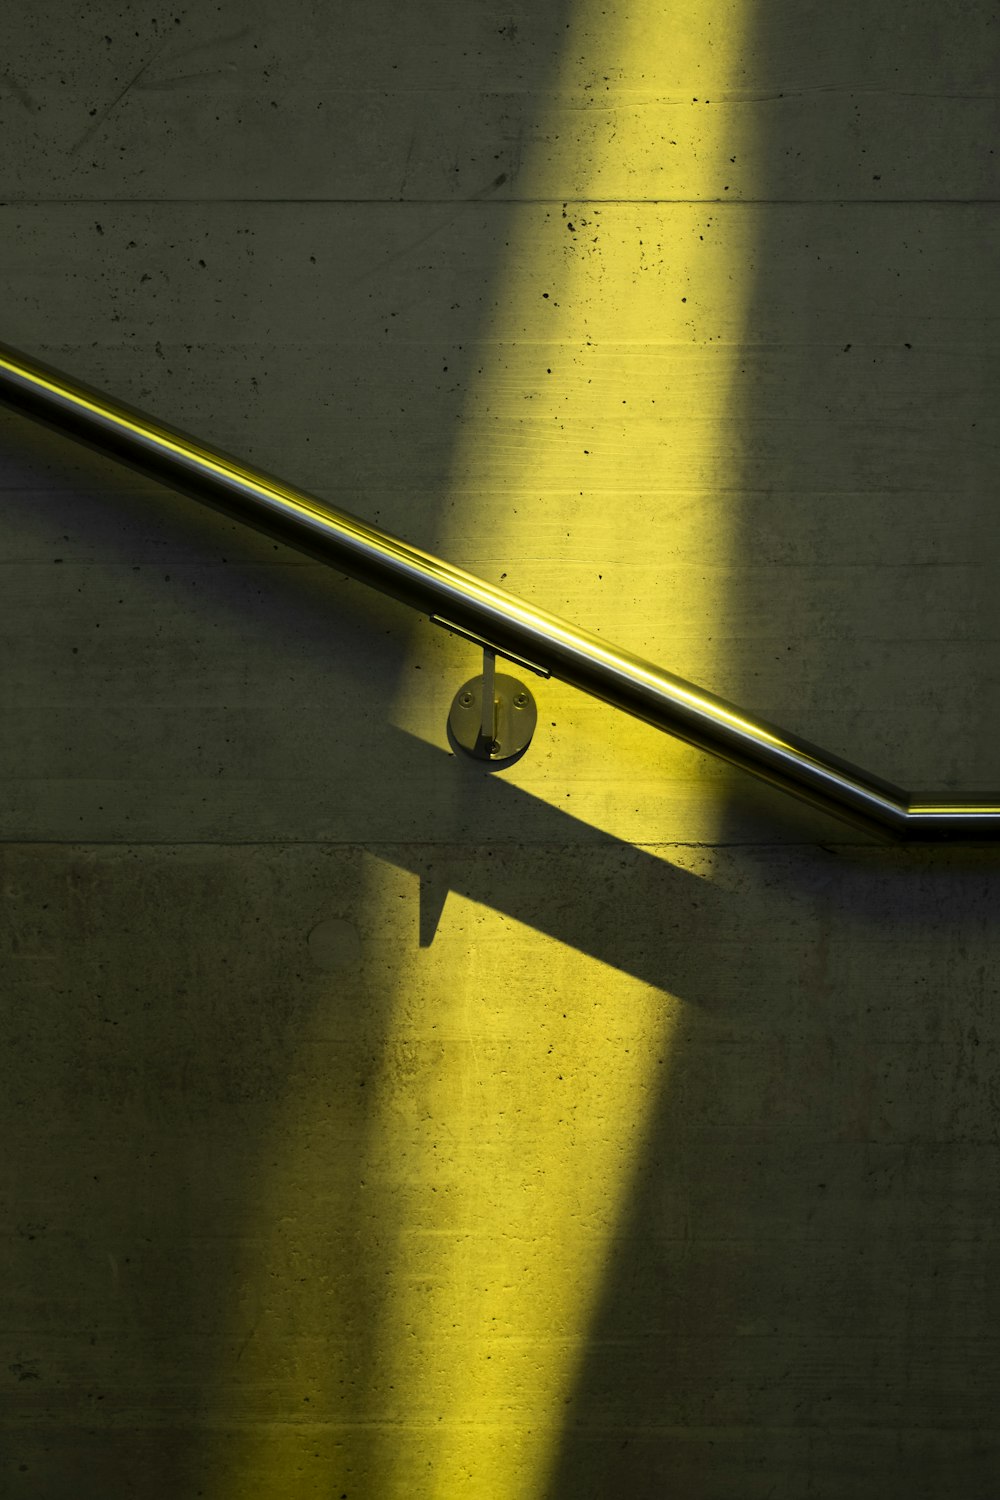 stainless steel railings on yellow and white painted wall